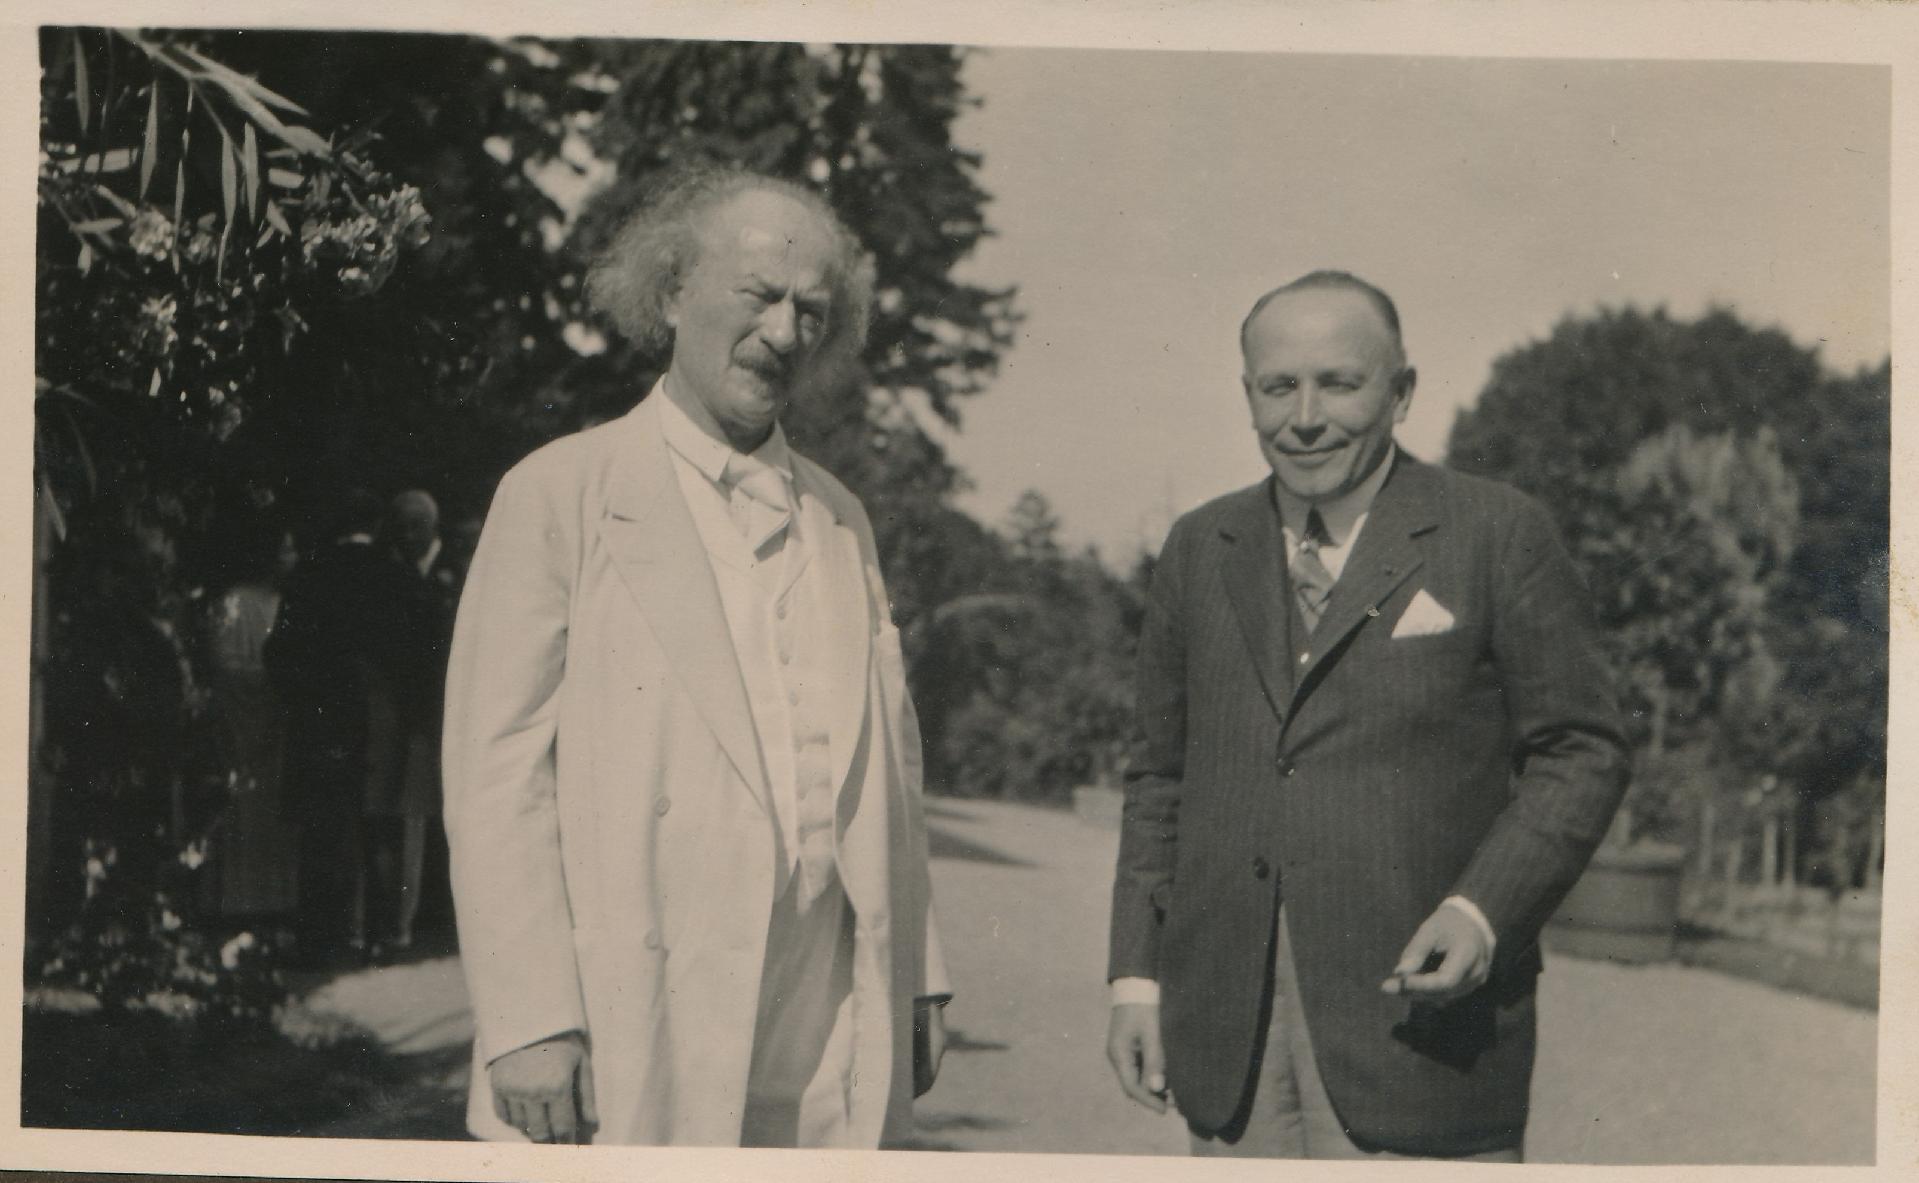 Black and white picture of two elegantly dressed men (one of them Ignacy Jan Paderewski) standing on the road, trees in the background. - grafika artykułu